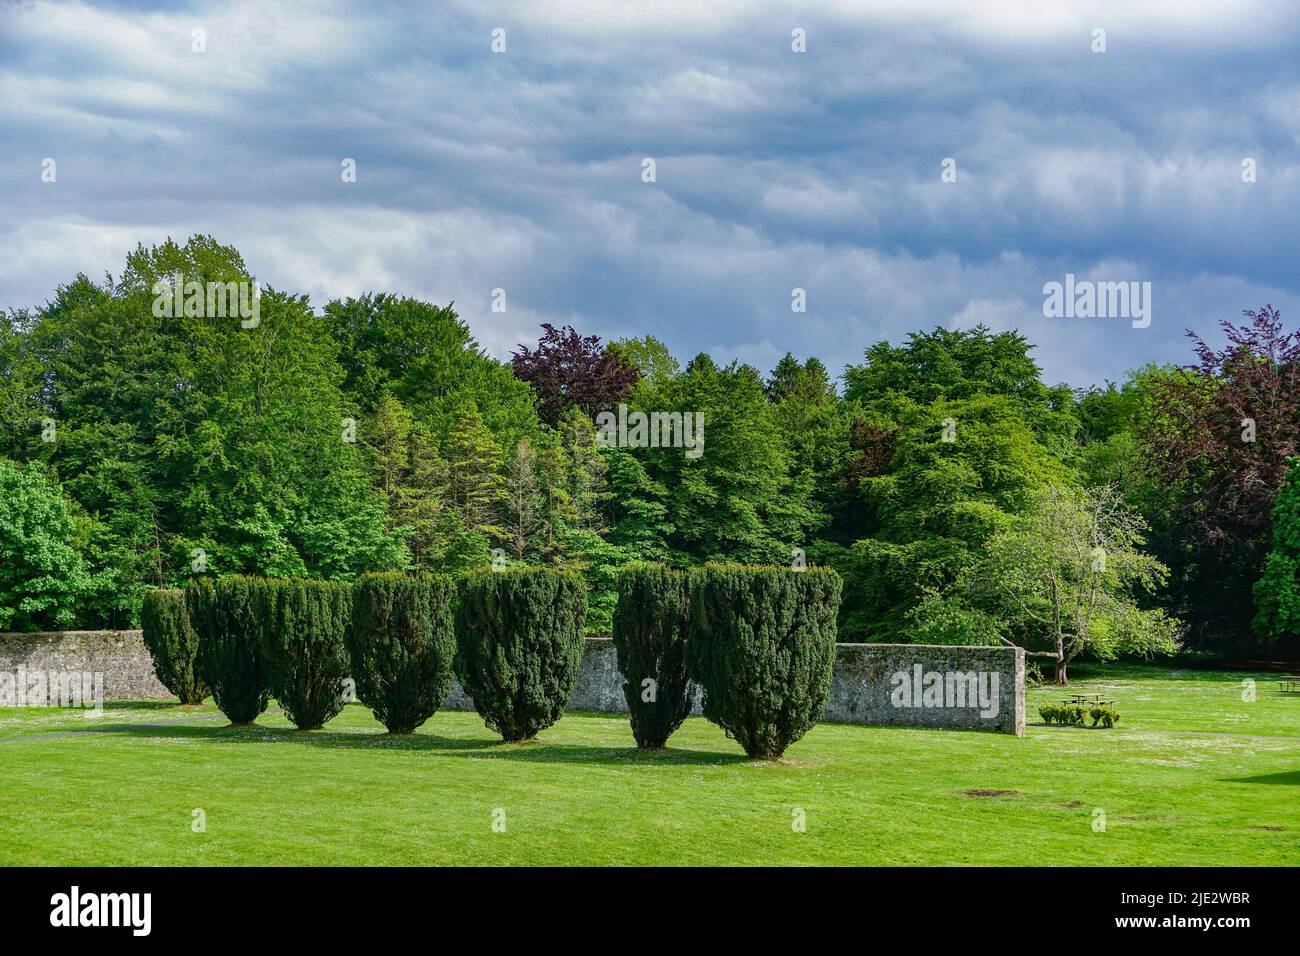 Gort, Co. Galway, Ireland: A row of upright Irish Yew trees (Taxus baccata) in the walled garden at Coole Park. Stock Photo